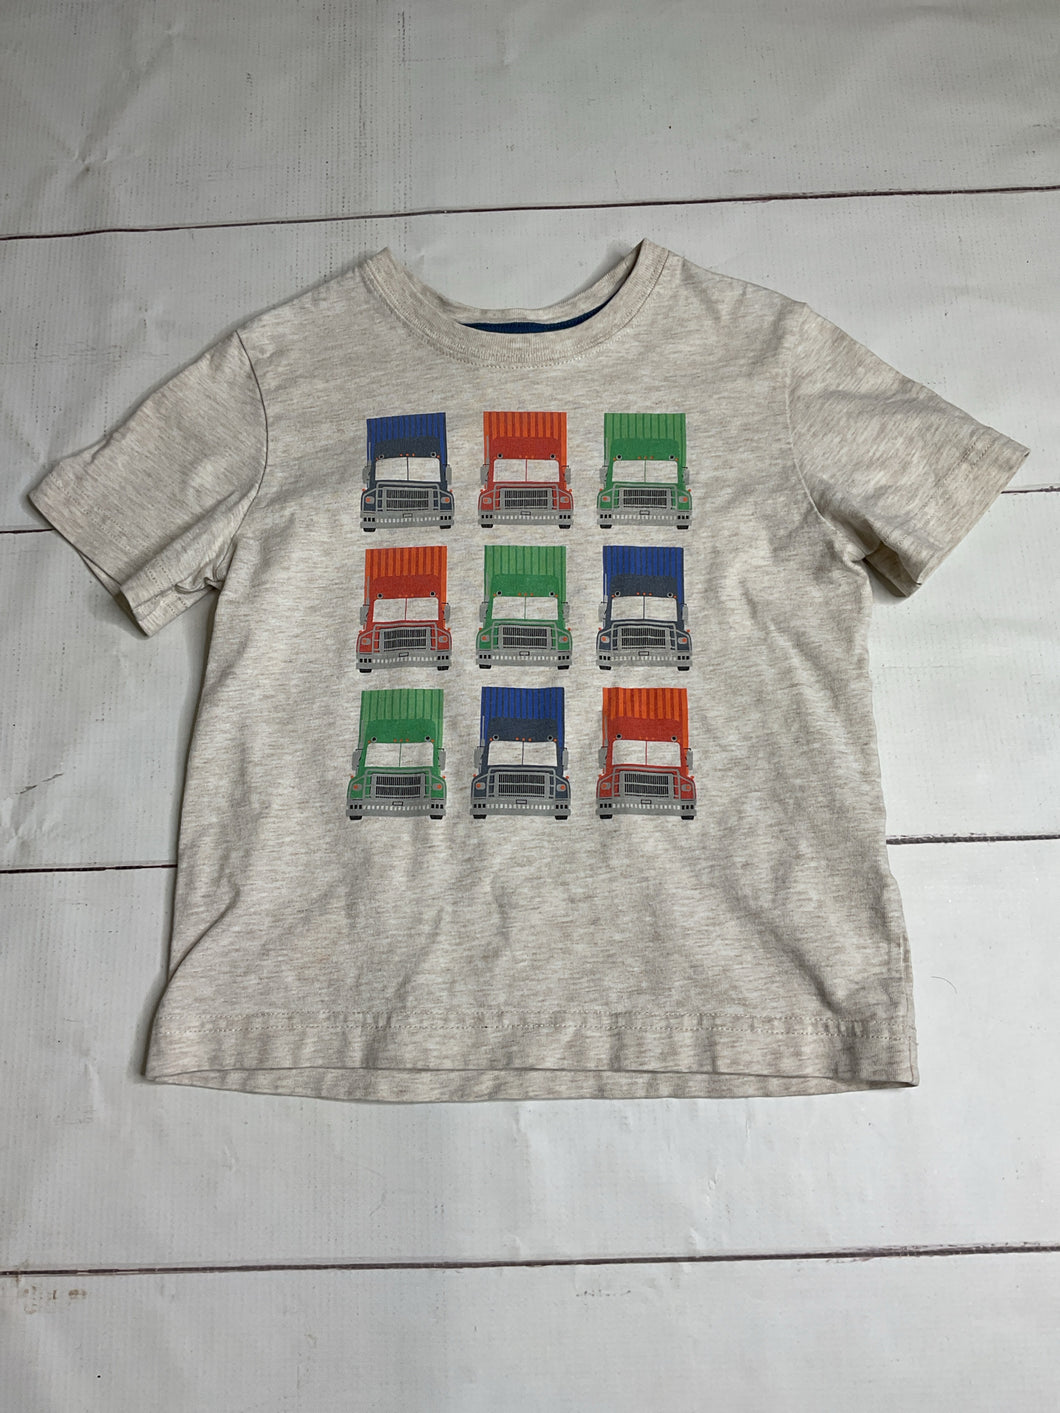 Hanna Andersson Size 5 Tshirt